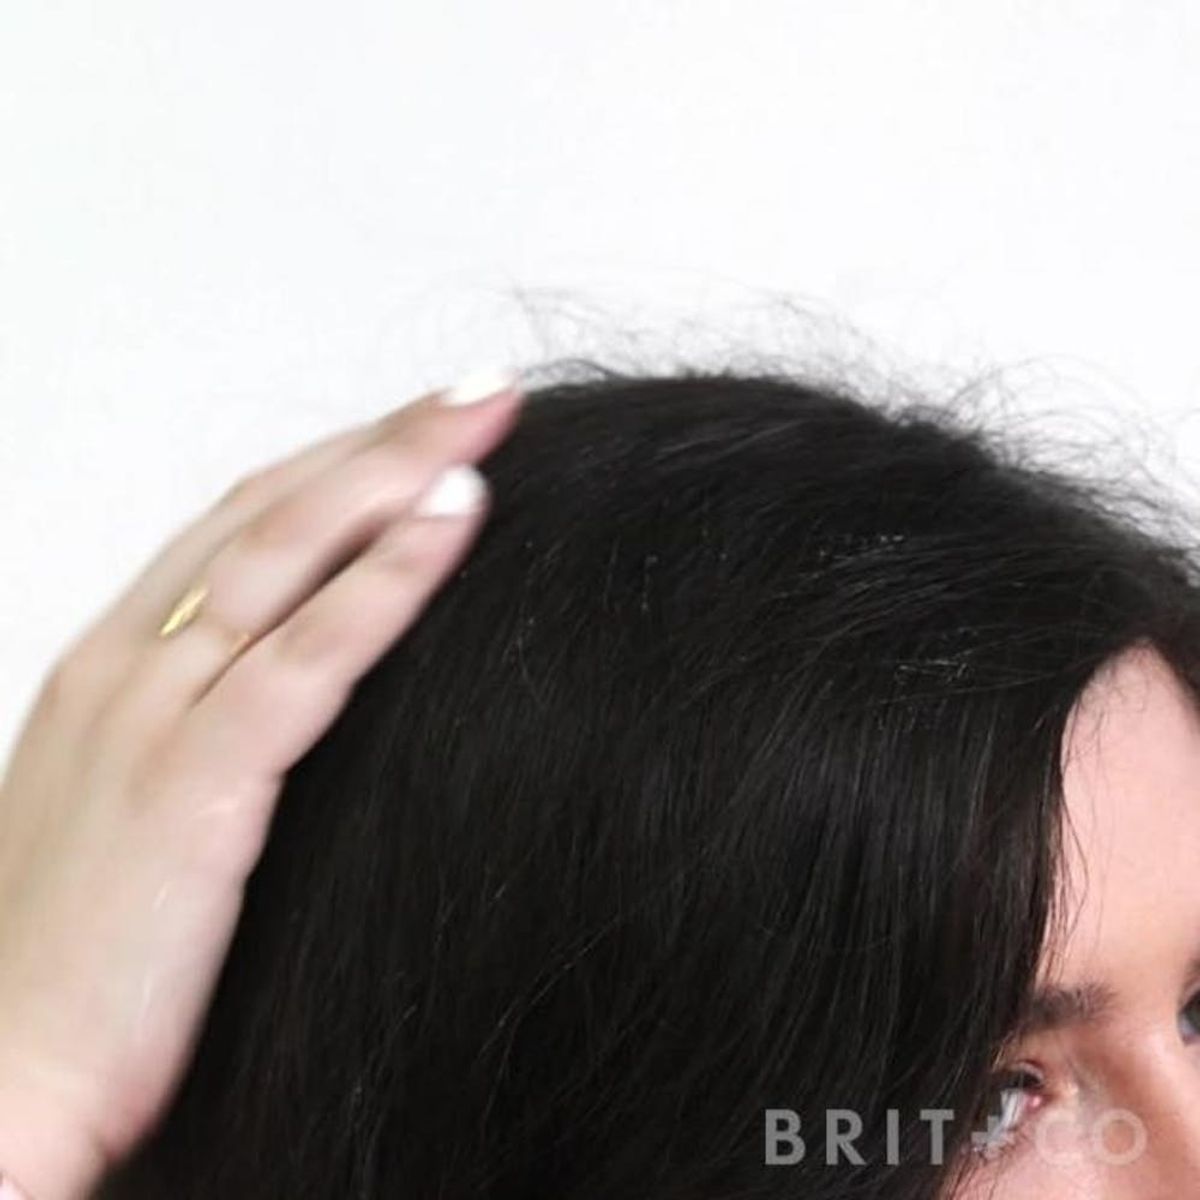 Life Hacks – How to Tame Frizzy Hair